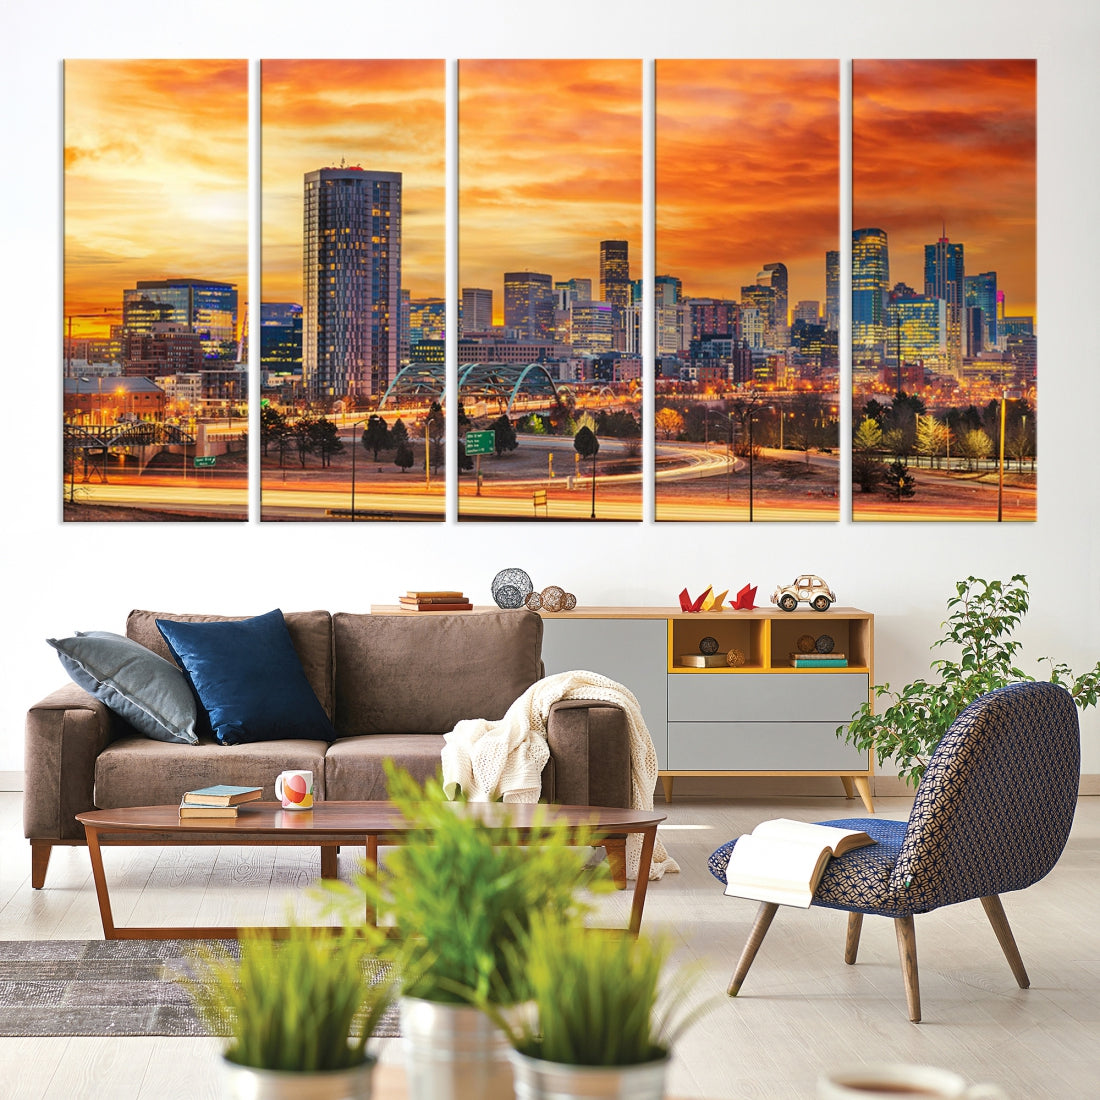 Thrilling Sunset Denver Wall Art Print Cityscape Picture Canvas Print